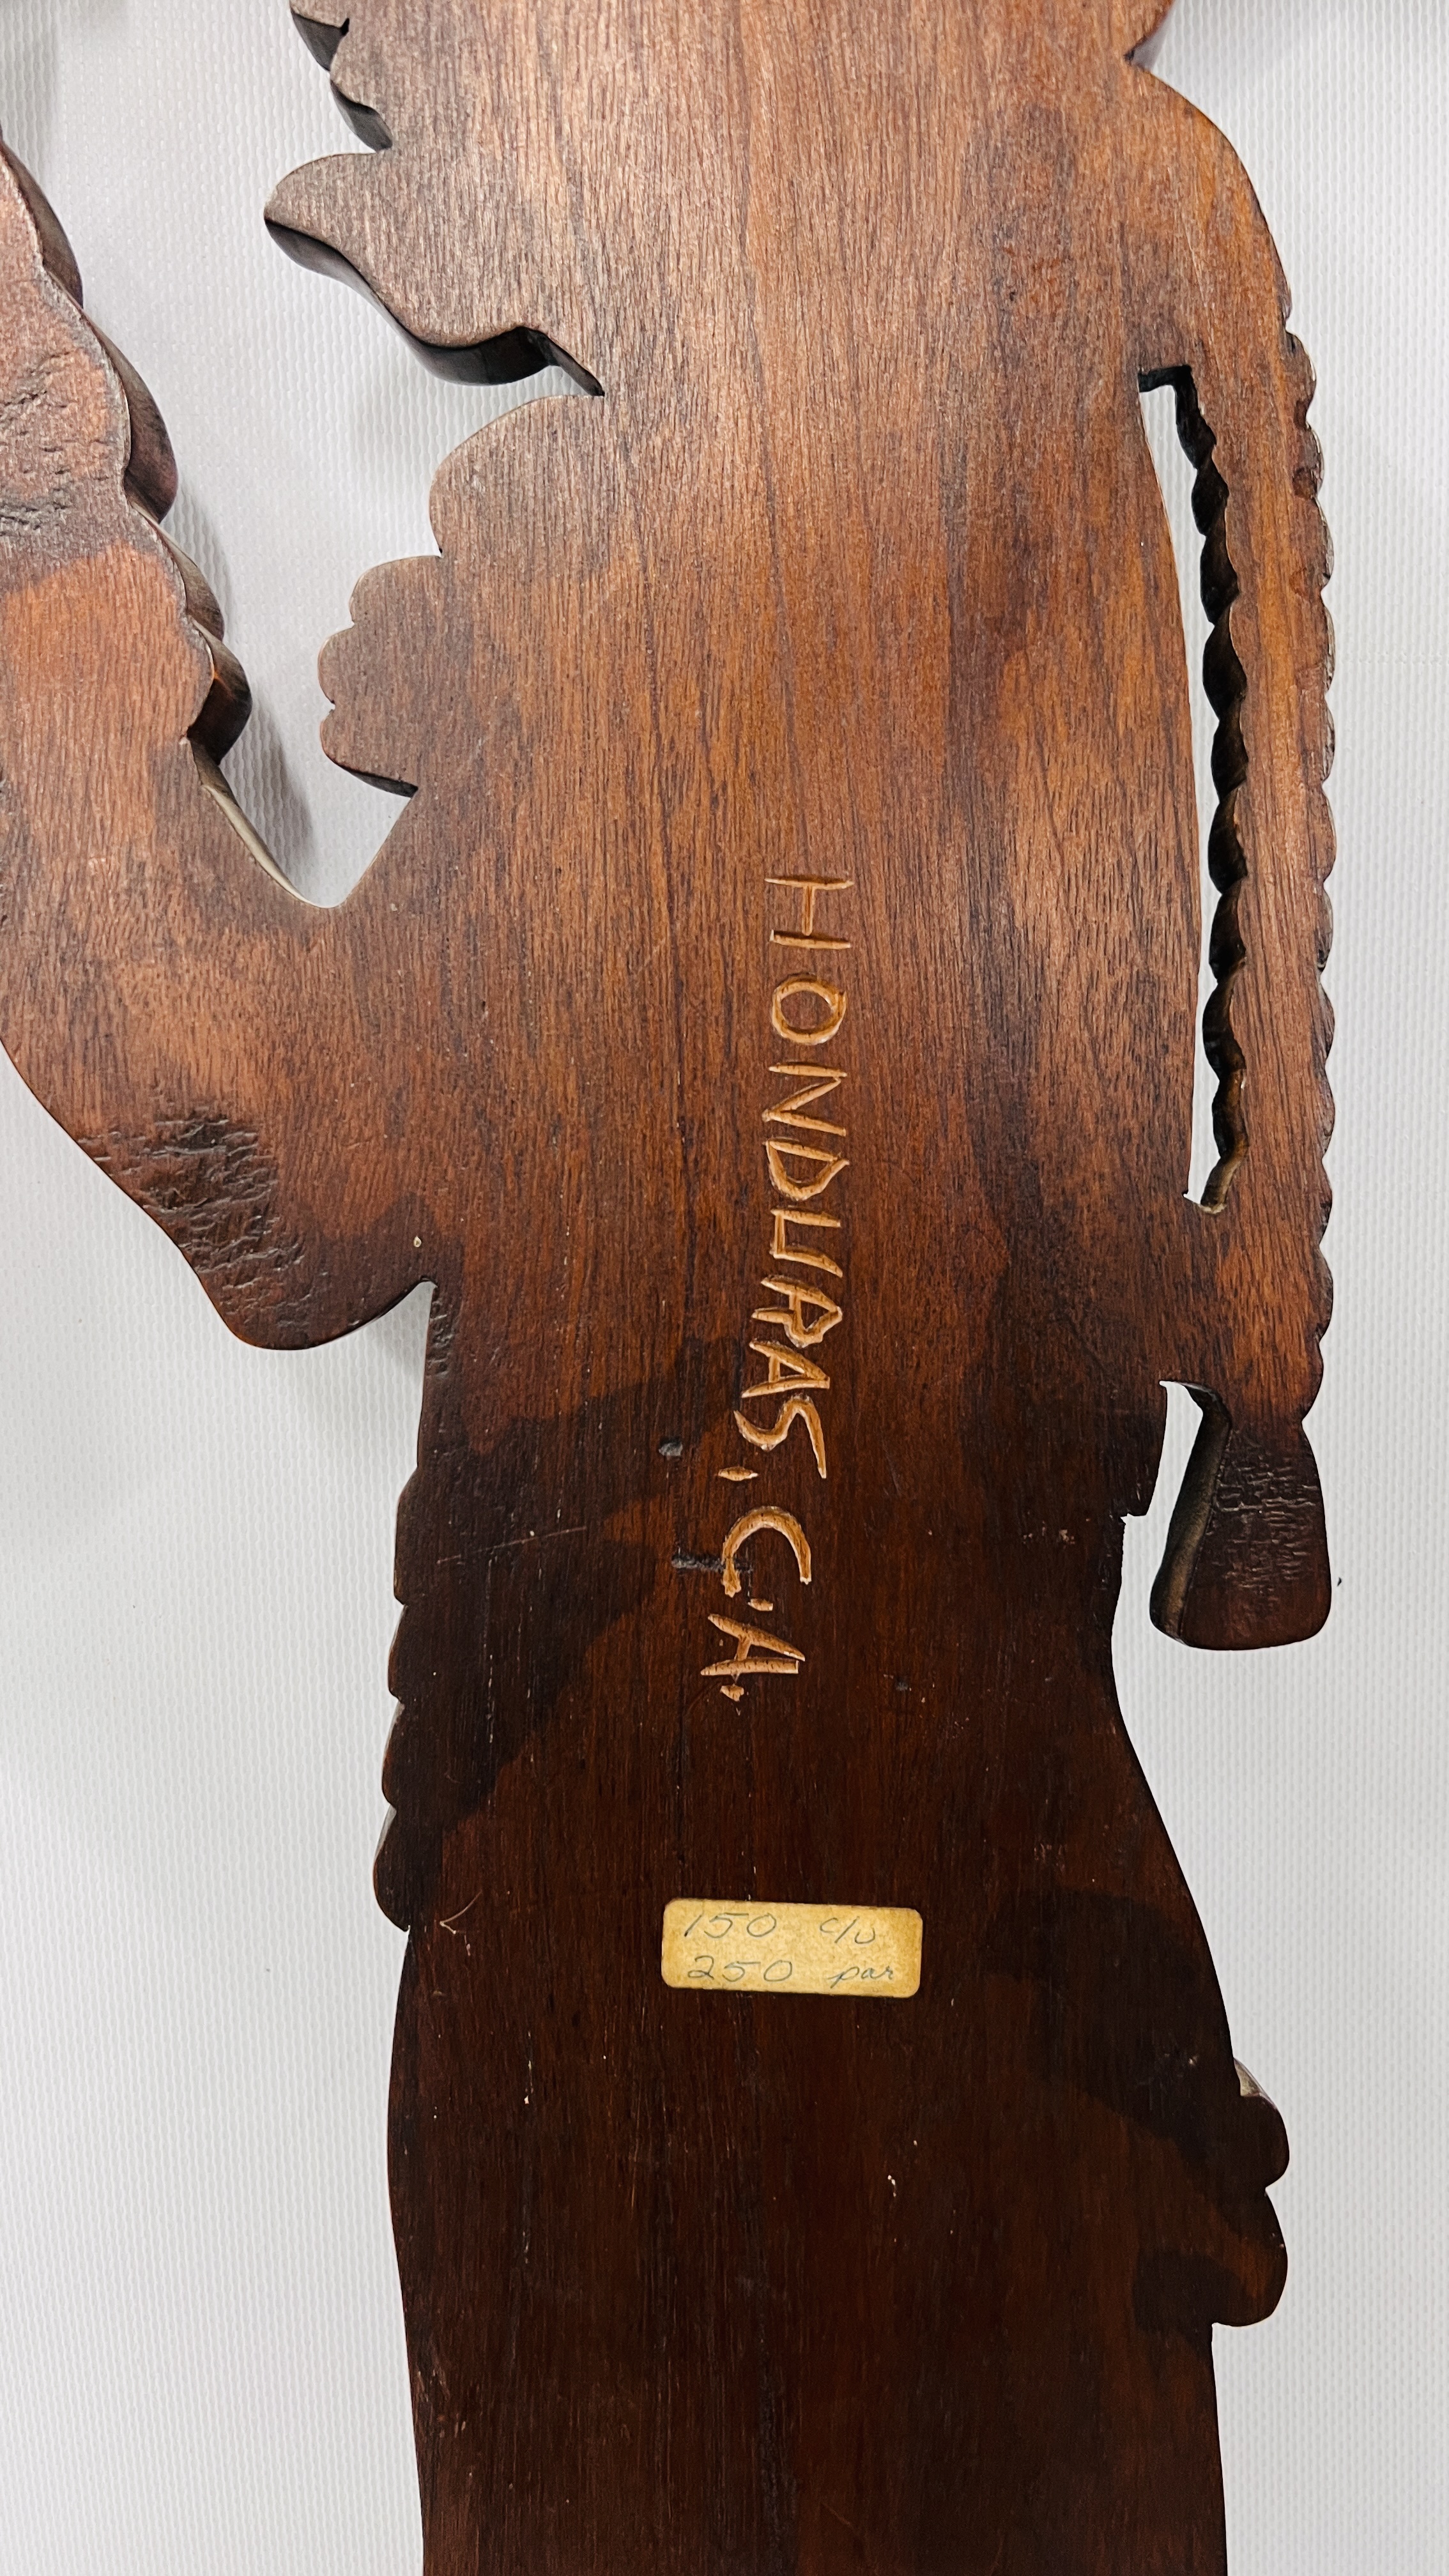 AN ETHNIC "HONDURAS" HARDWOOD WALL CARVING OF A STANDING FIGURE HEIGHT 84CM. - Image 6 of 6